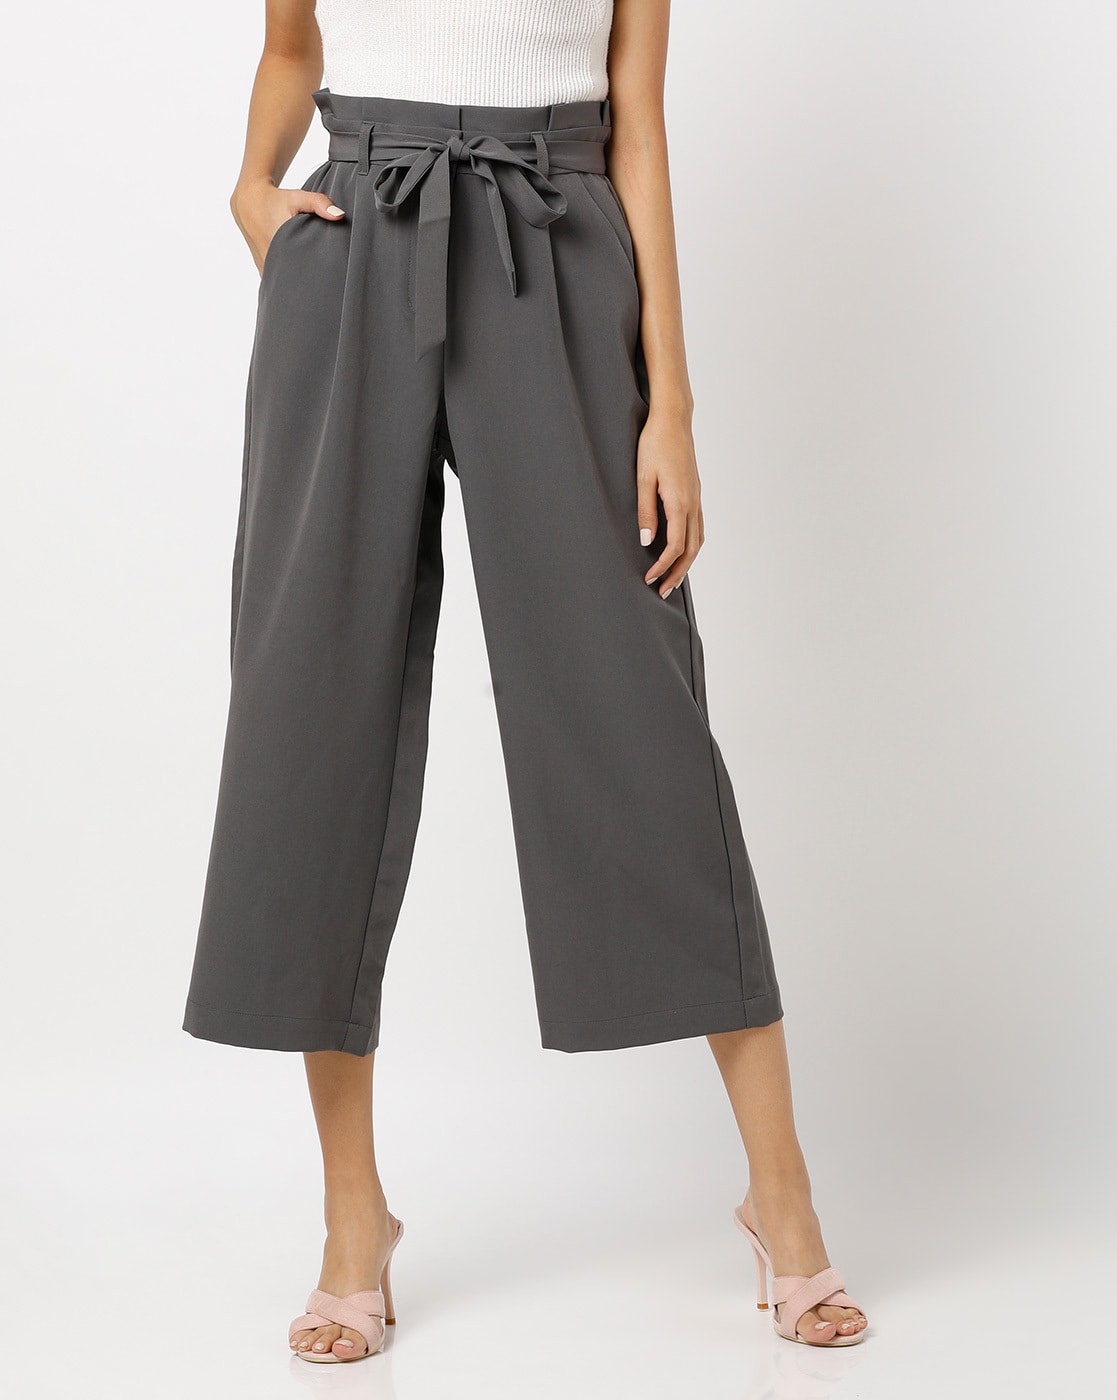 HM Paper Bag Trousers in Gray  Lyst